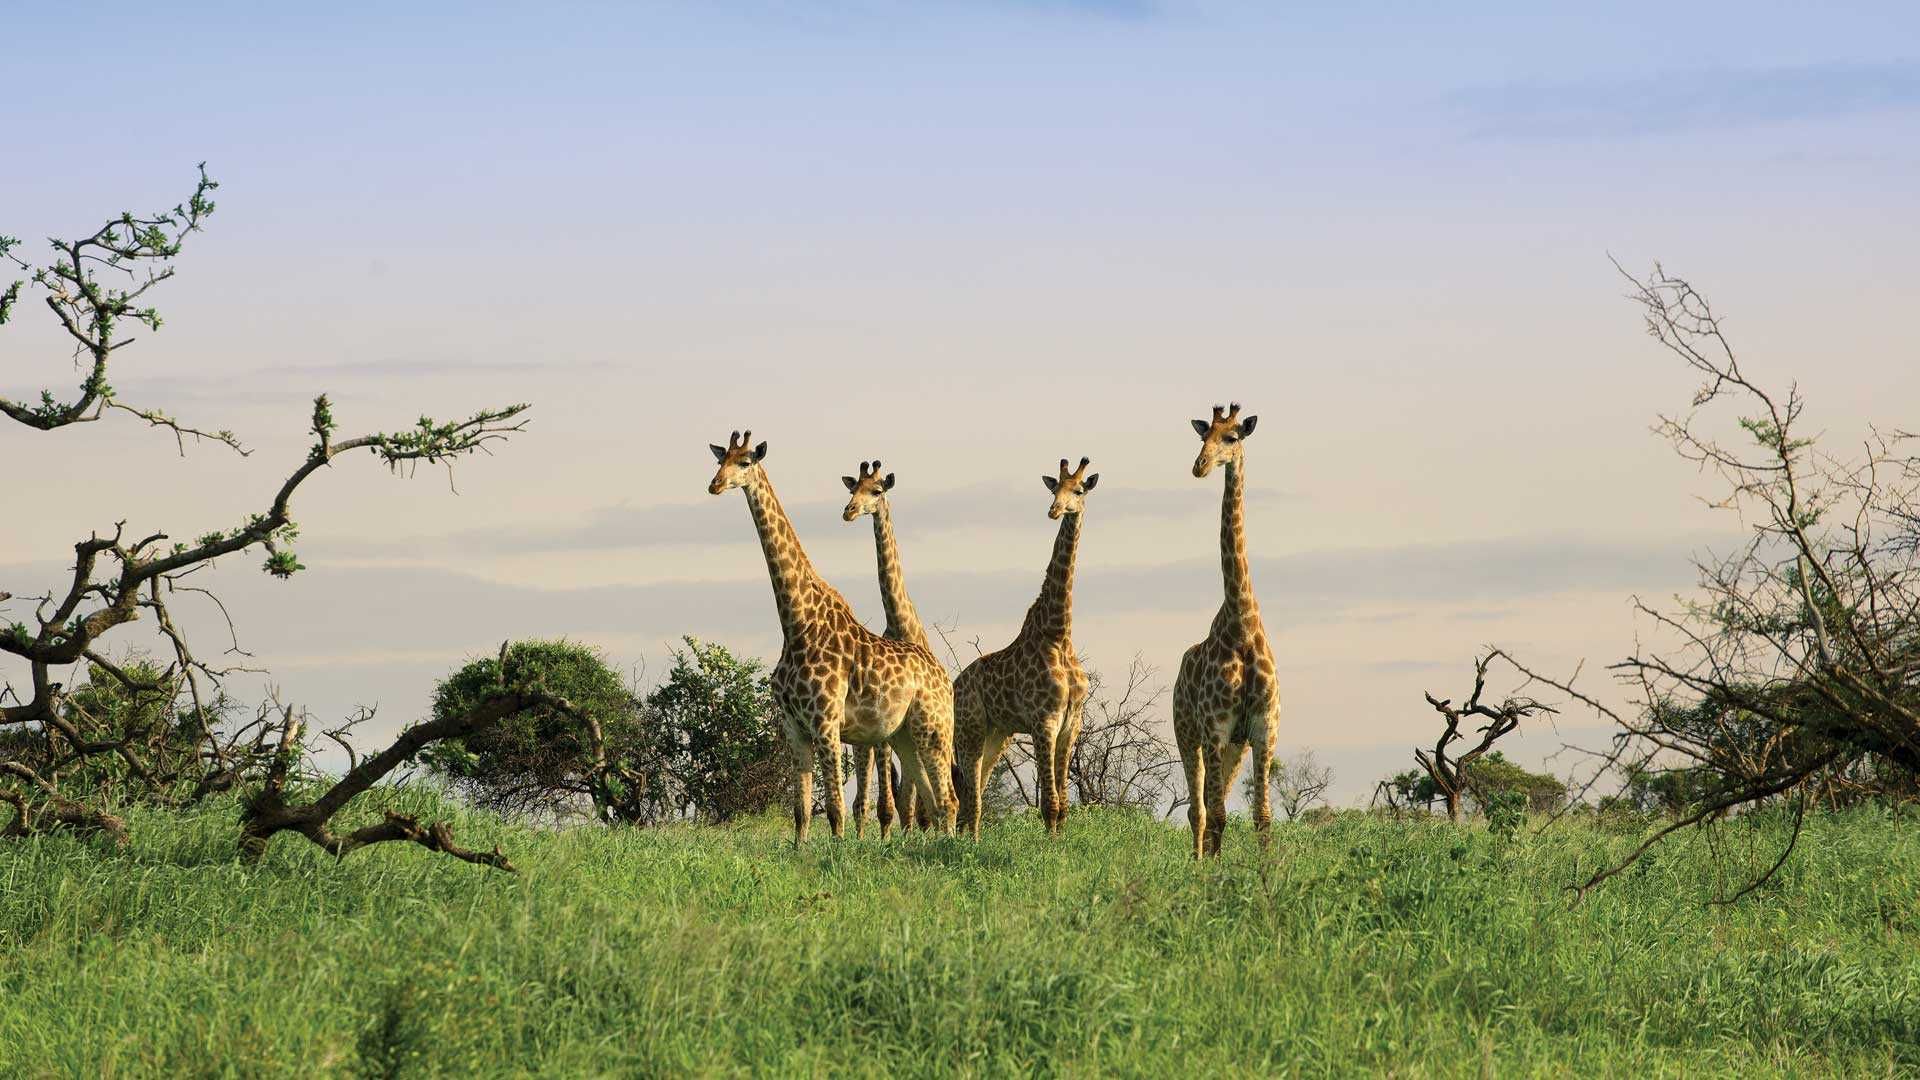 Journey of giraffe at phinda reserve in south africa